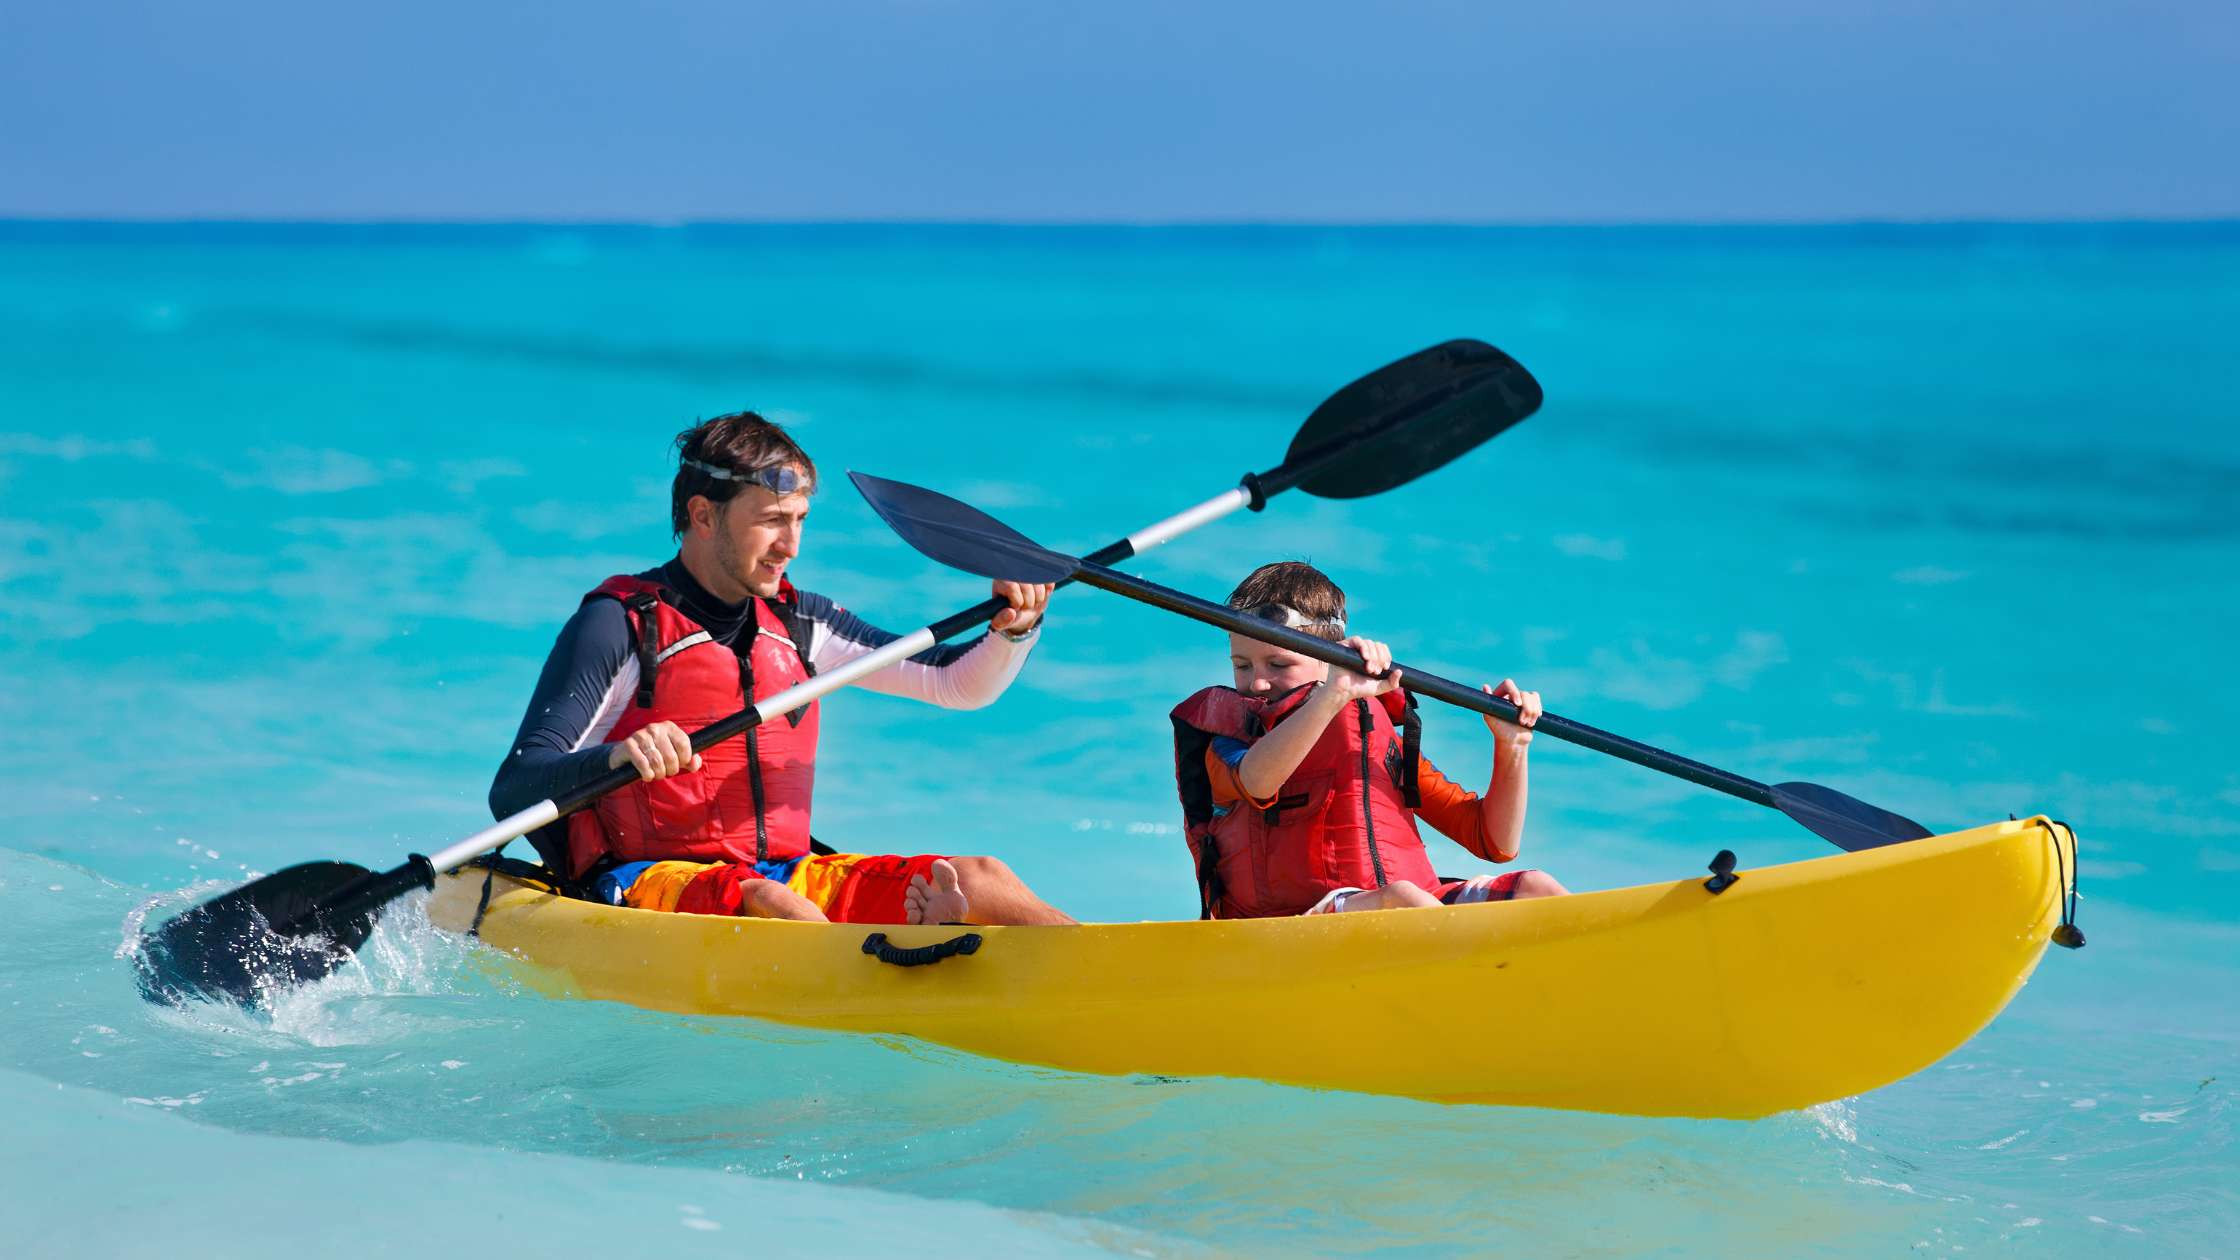 When you think about kayaking, you likely conjure up images of adventures filled with splashing, wild fun. But can you kayak if you can’t swim?